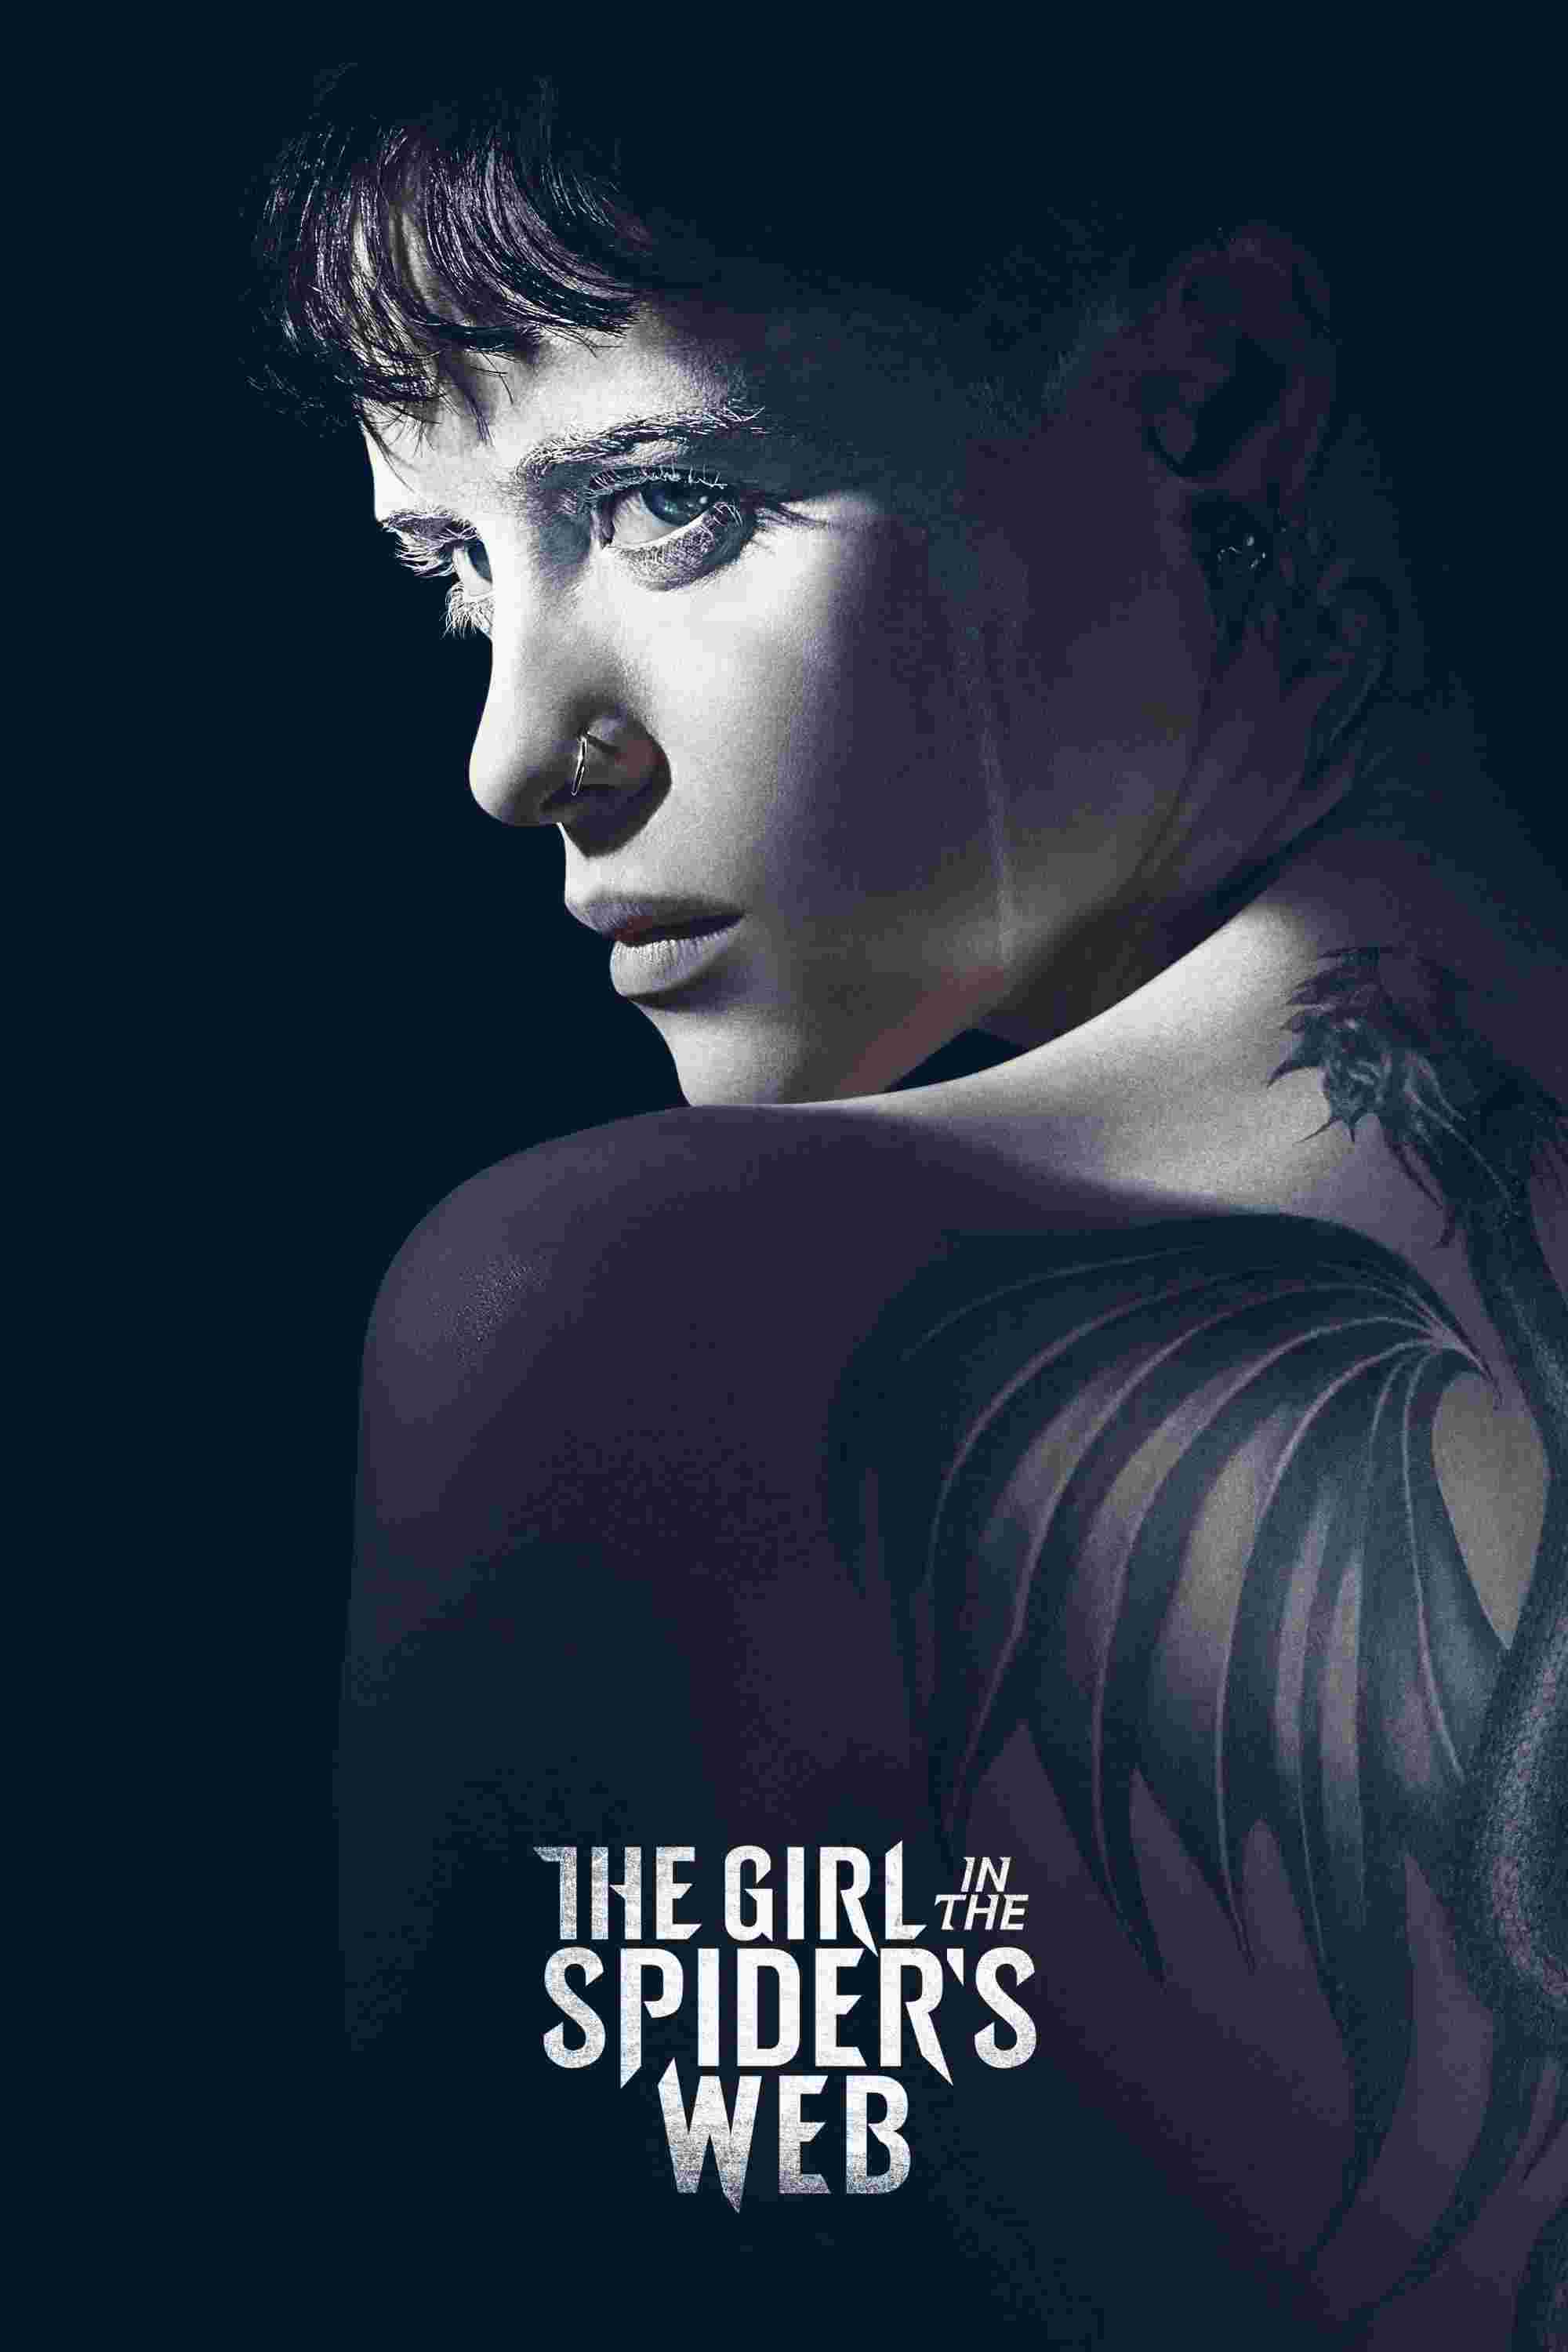 The Girl in the Spider's Web (2018) Claire Foy